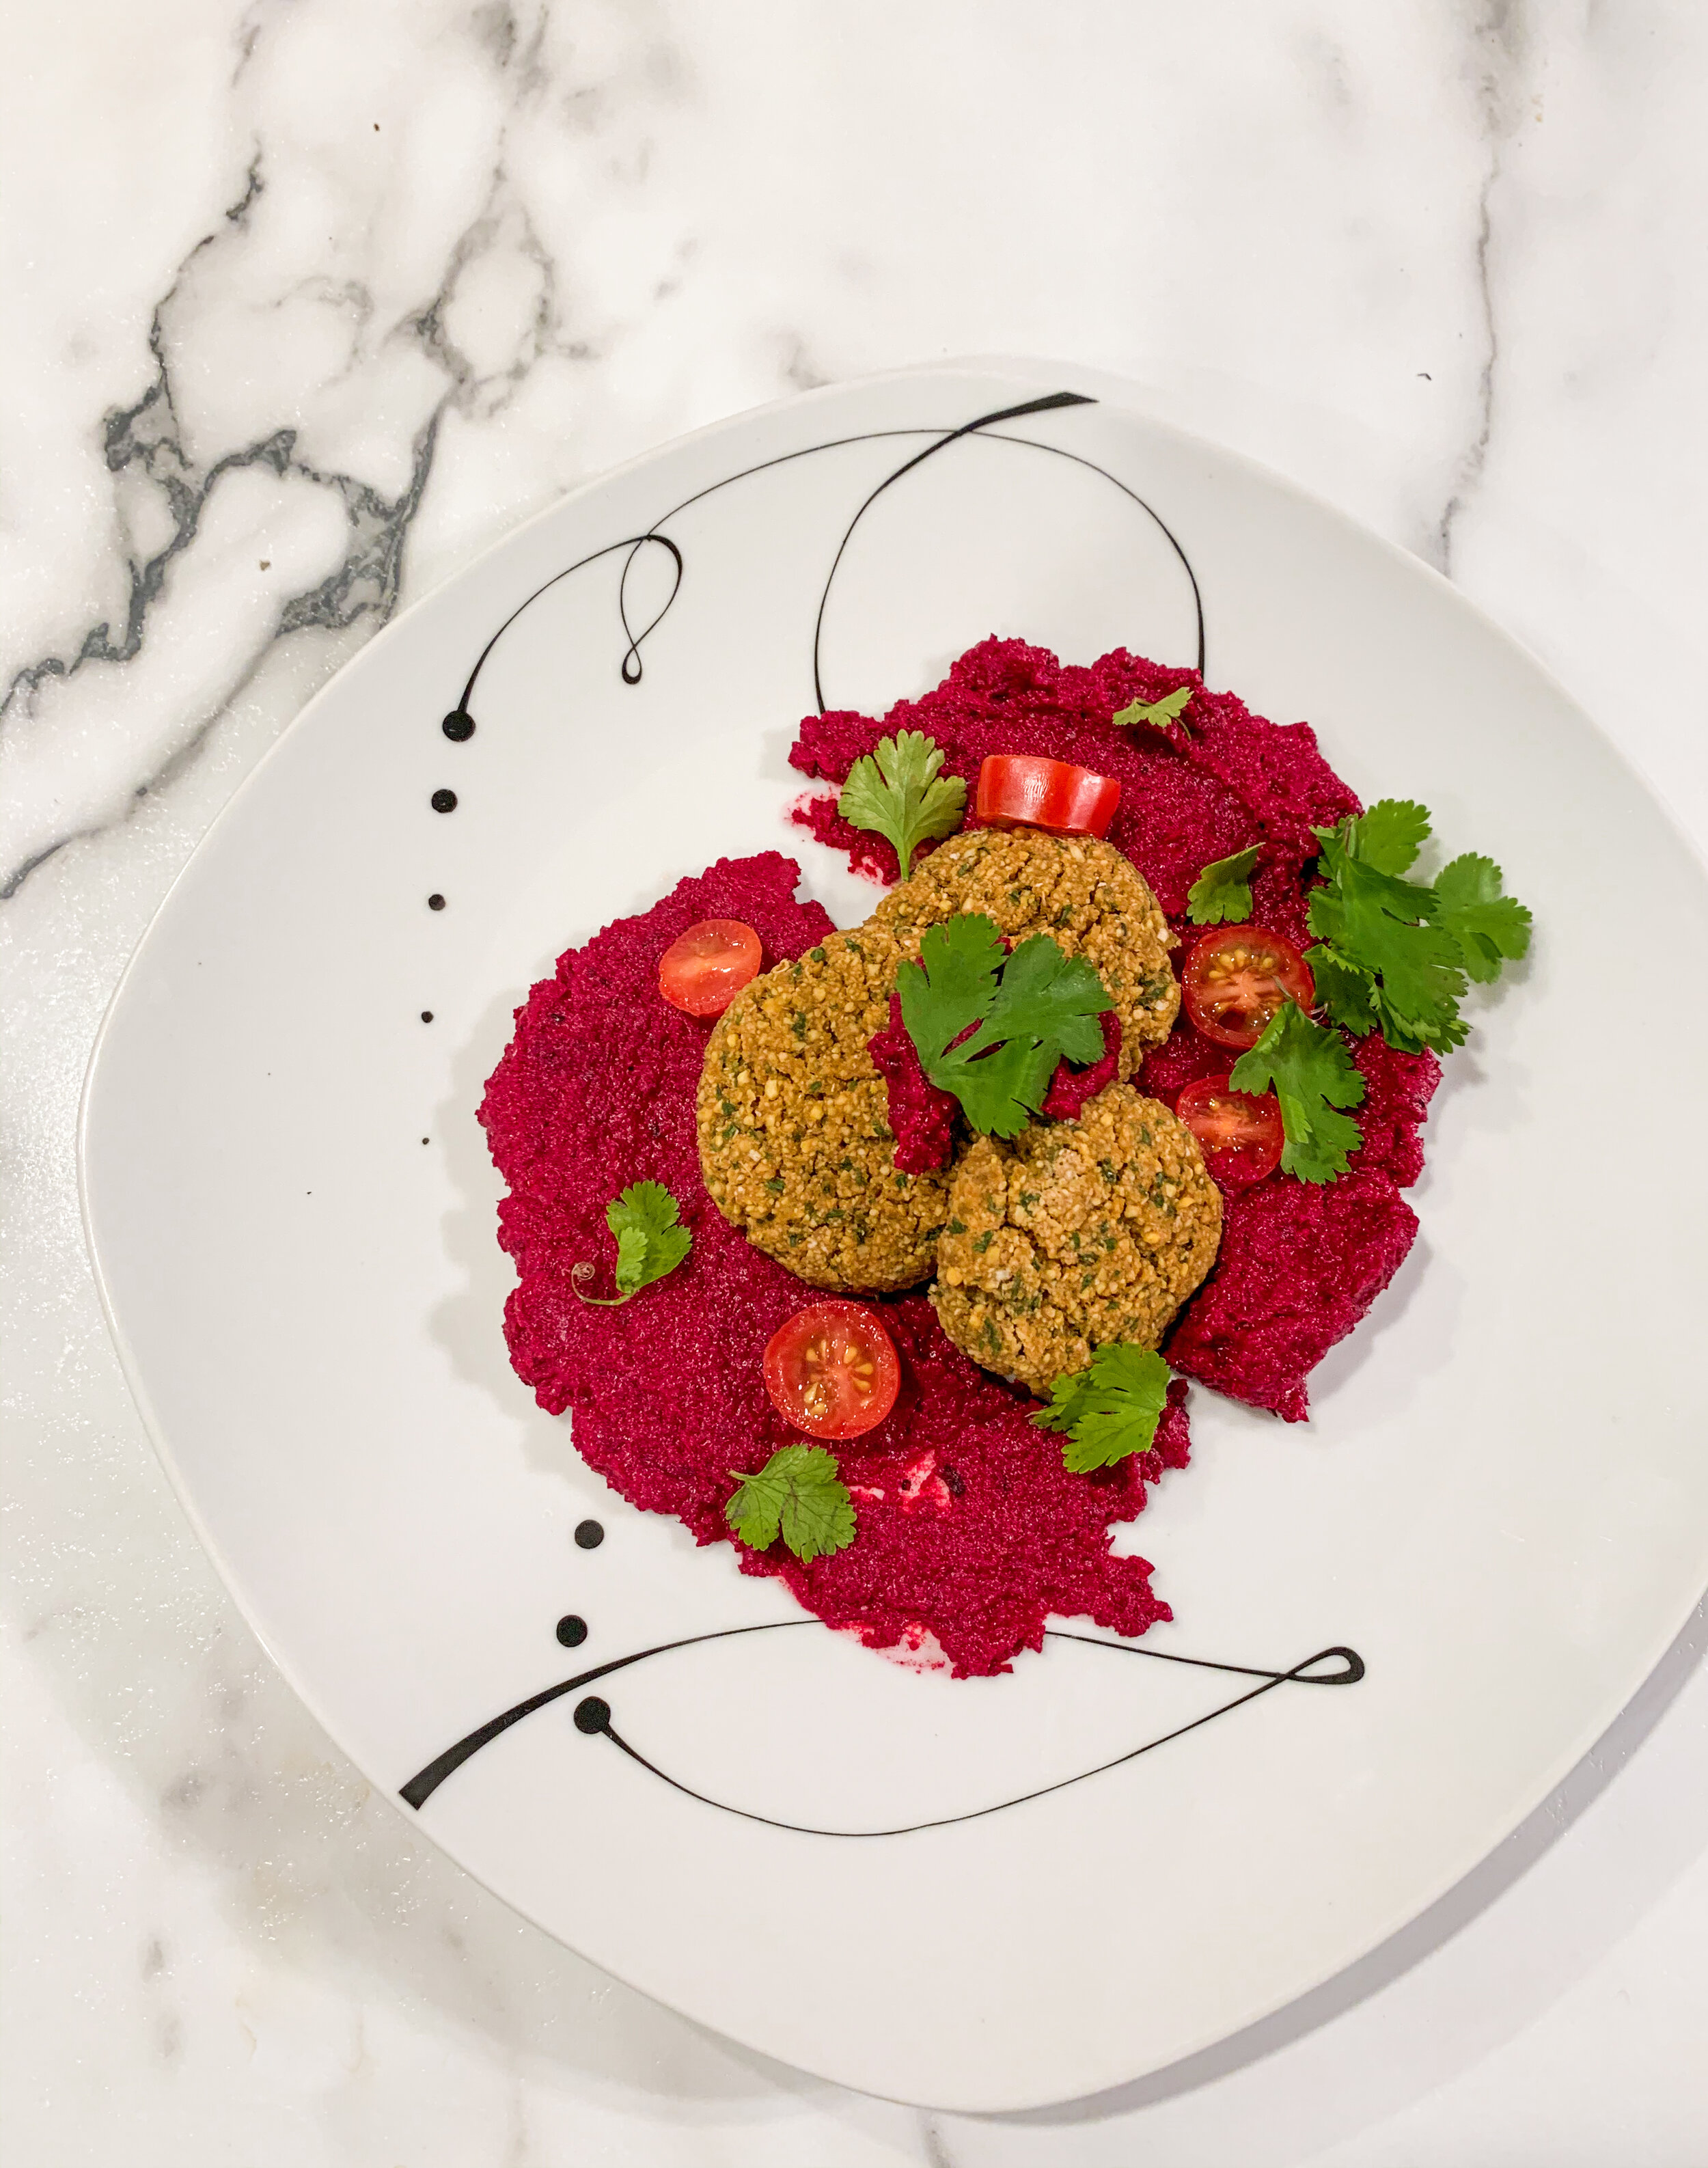 Roasted-Beet-Hummus-With-Baked-Falafel 